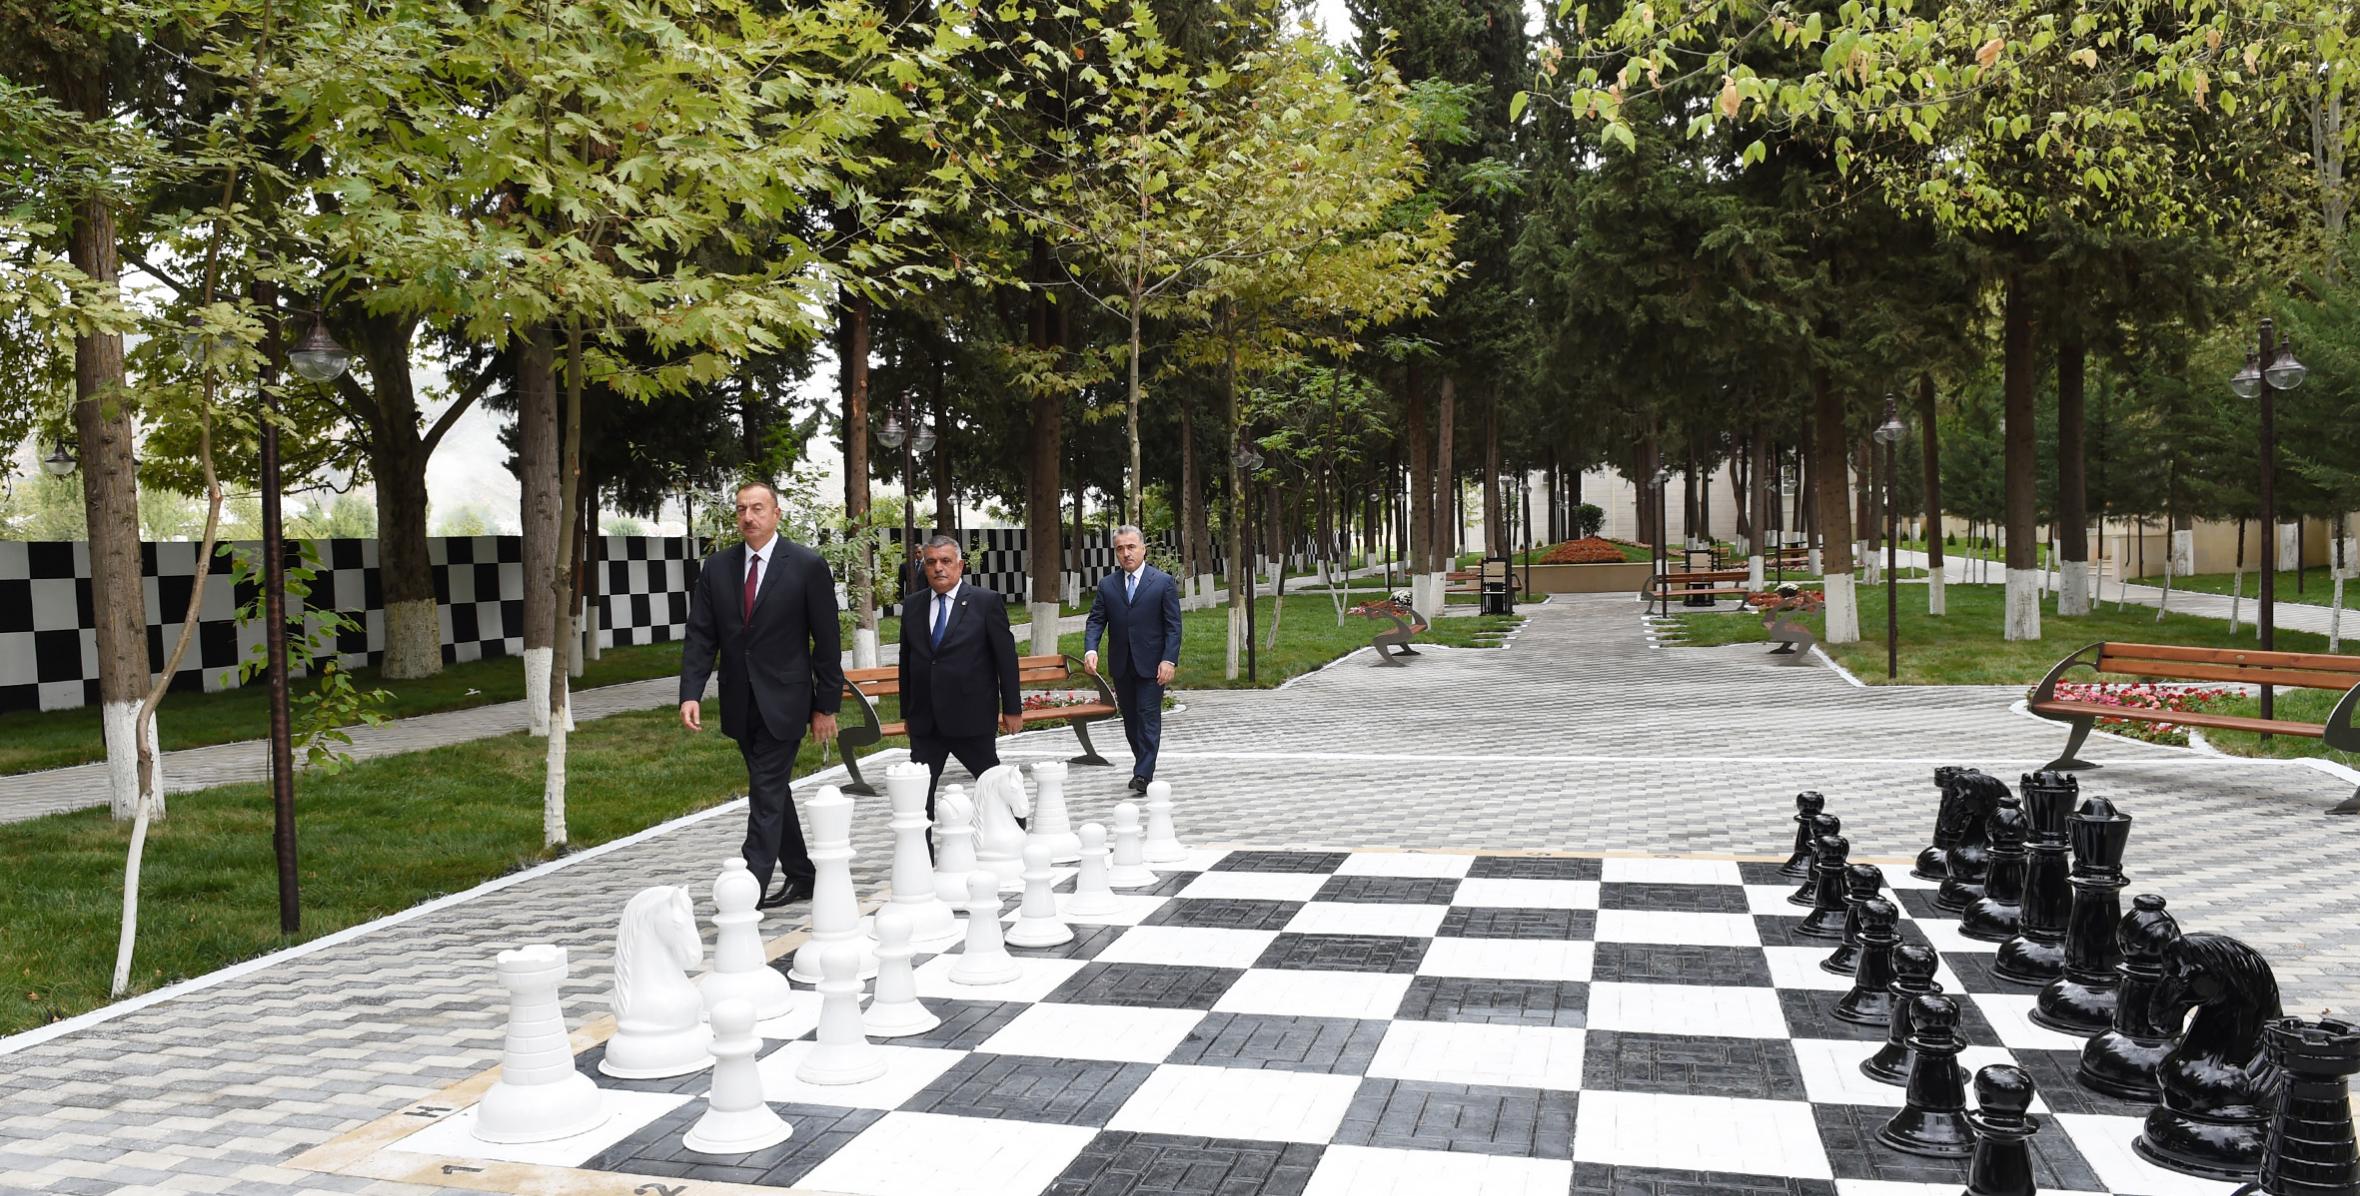 Ilham Aliyev attended the opening of the newly-reconstructed Aghsu Chess School